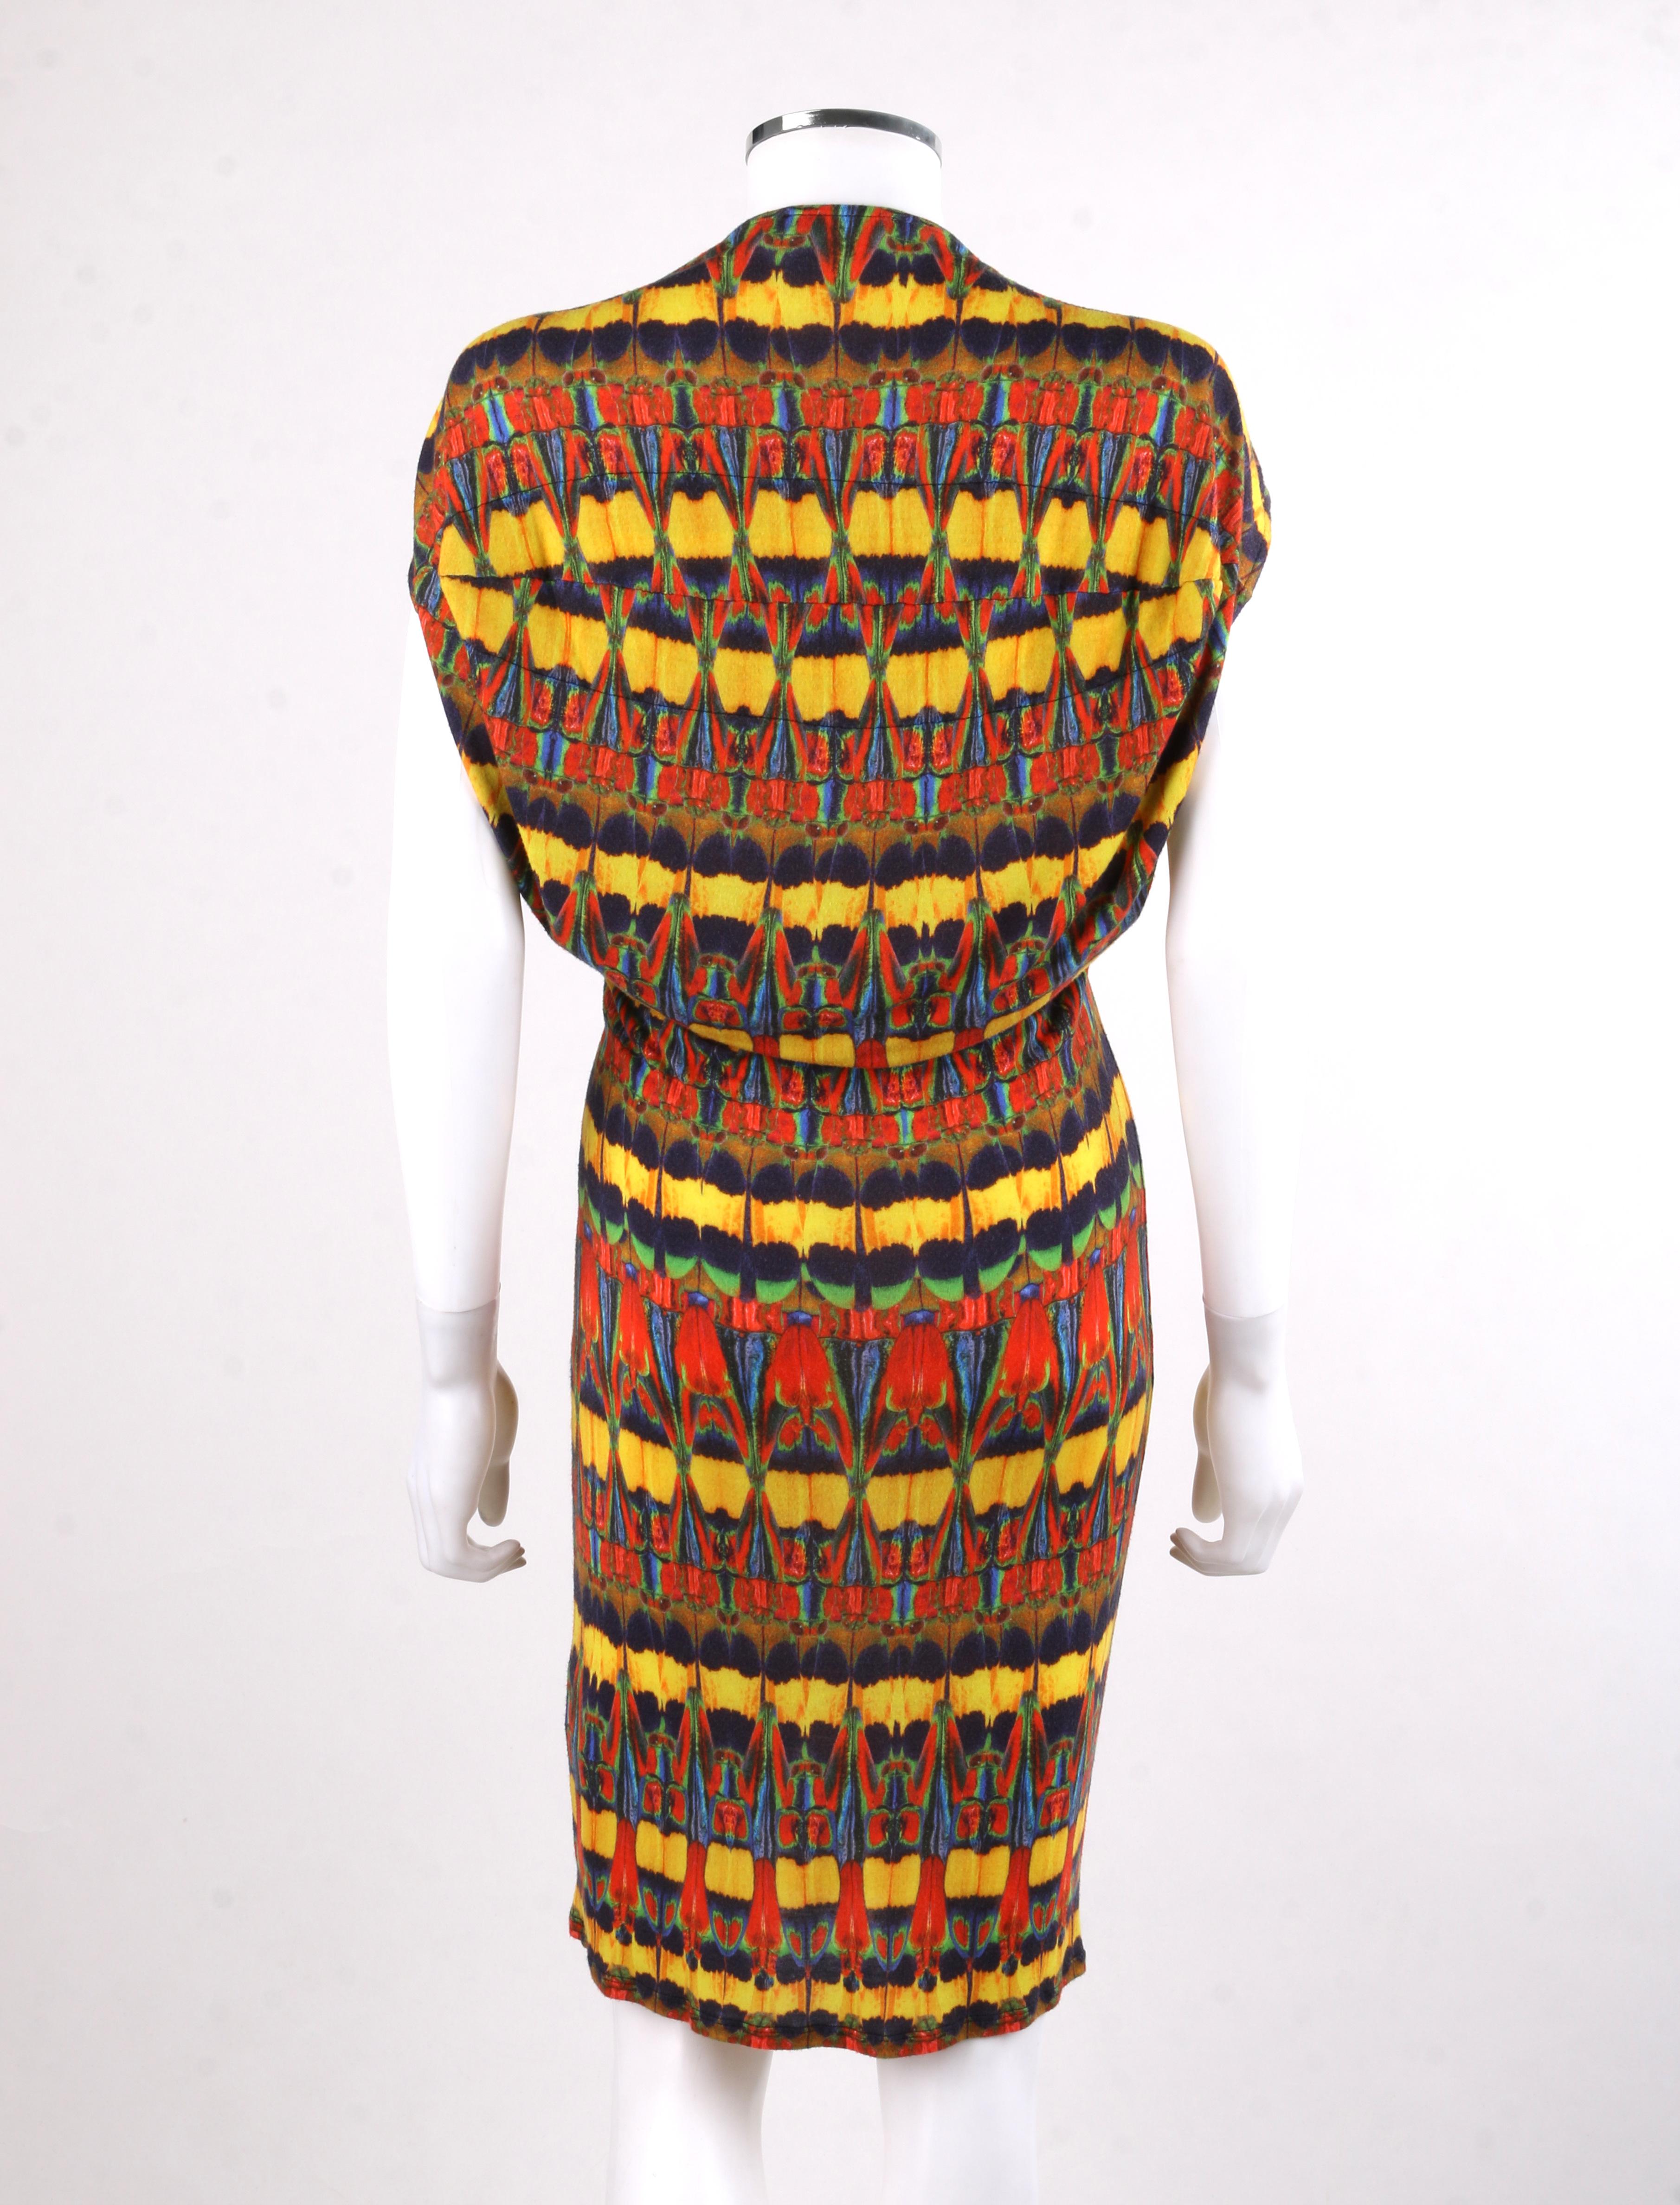 ALEXANDER McQUEEN S/S 2010 Multi-color Kaleidoscope Jersey Knit Dress  In Excellent Condition For Sale In Thiensville, WI